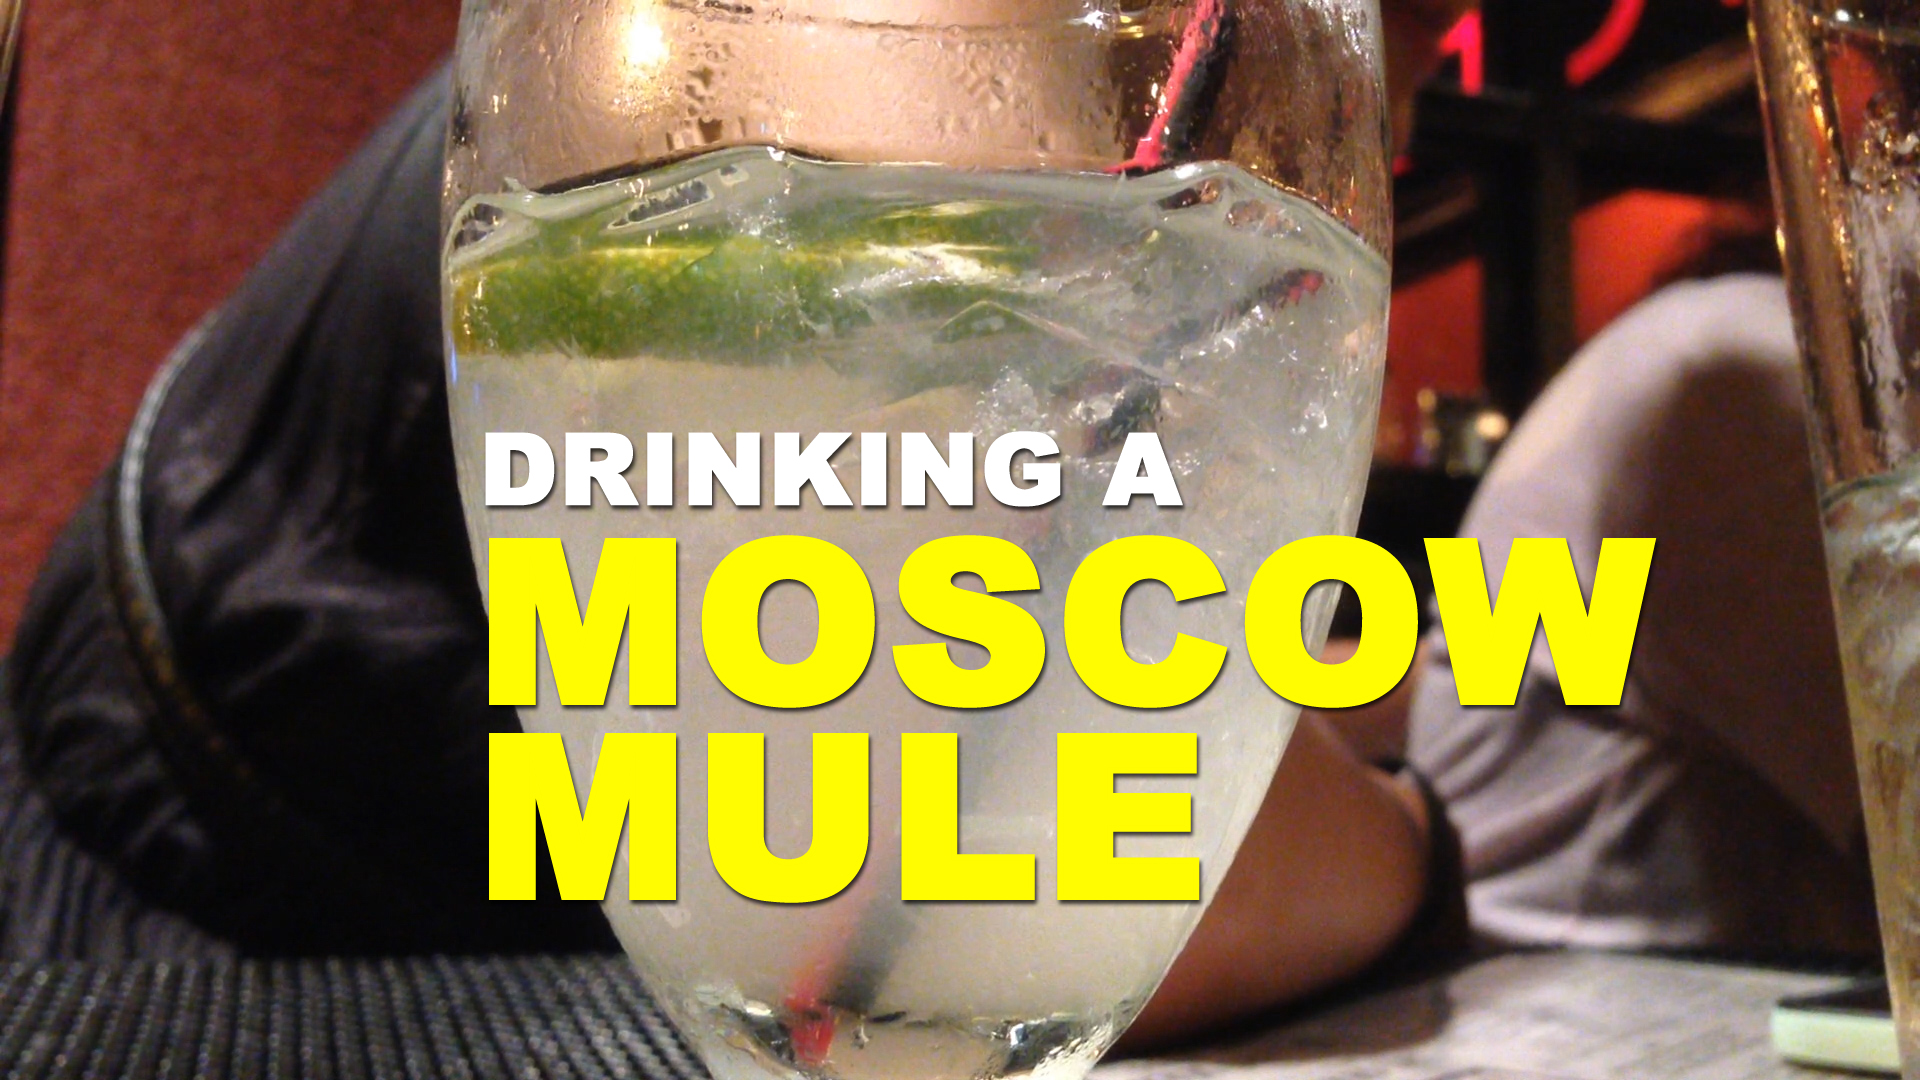 MOSCOW MULE ICON